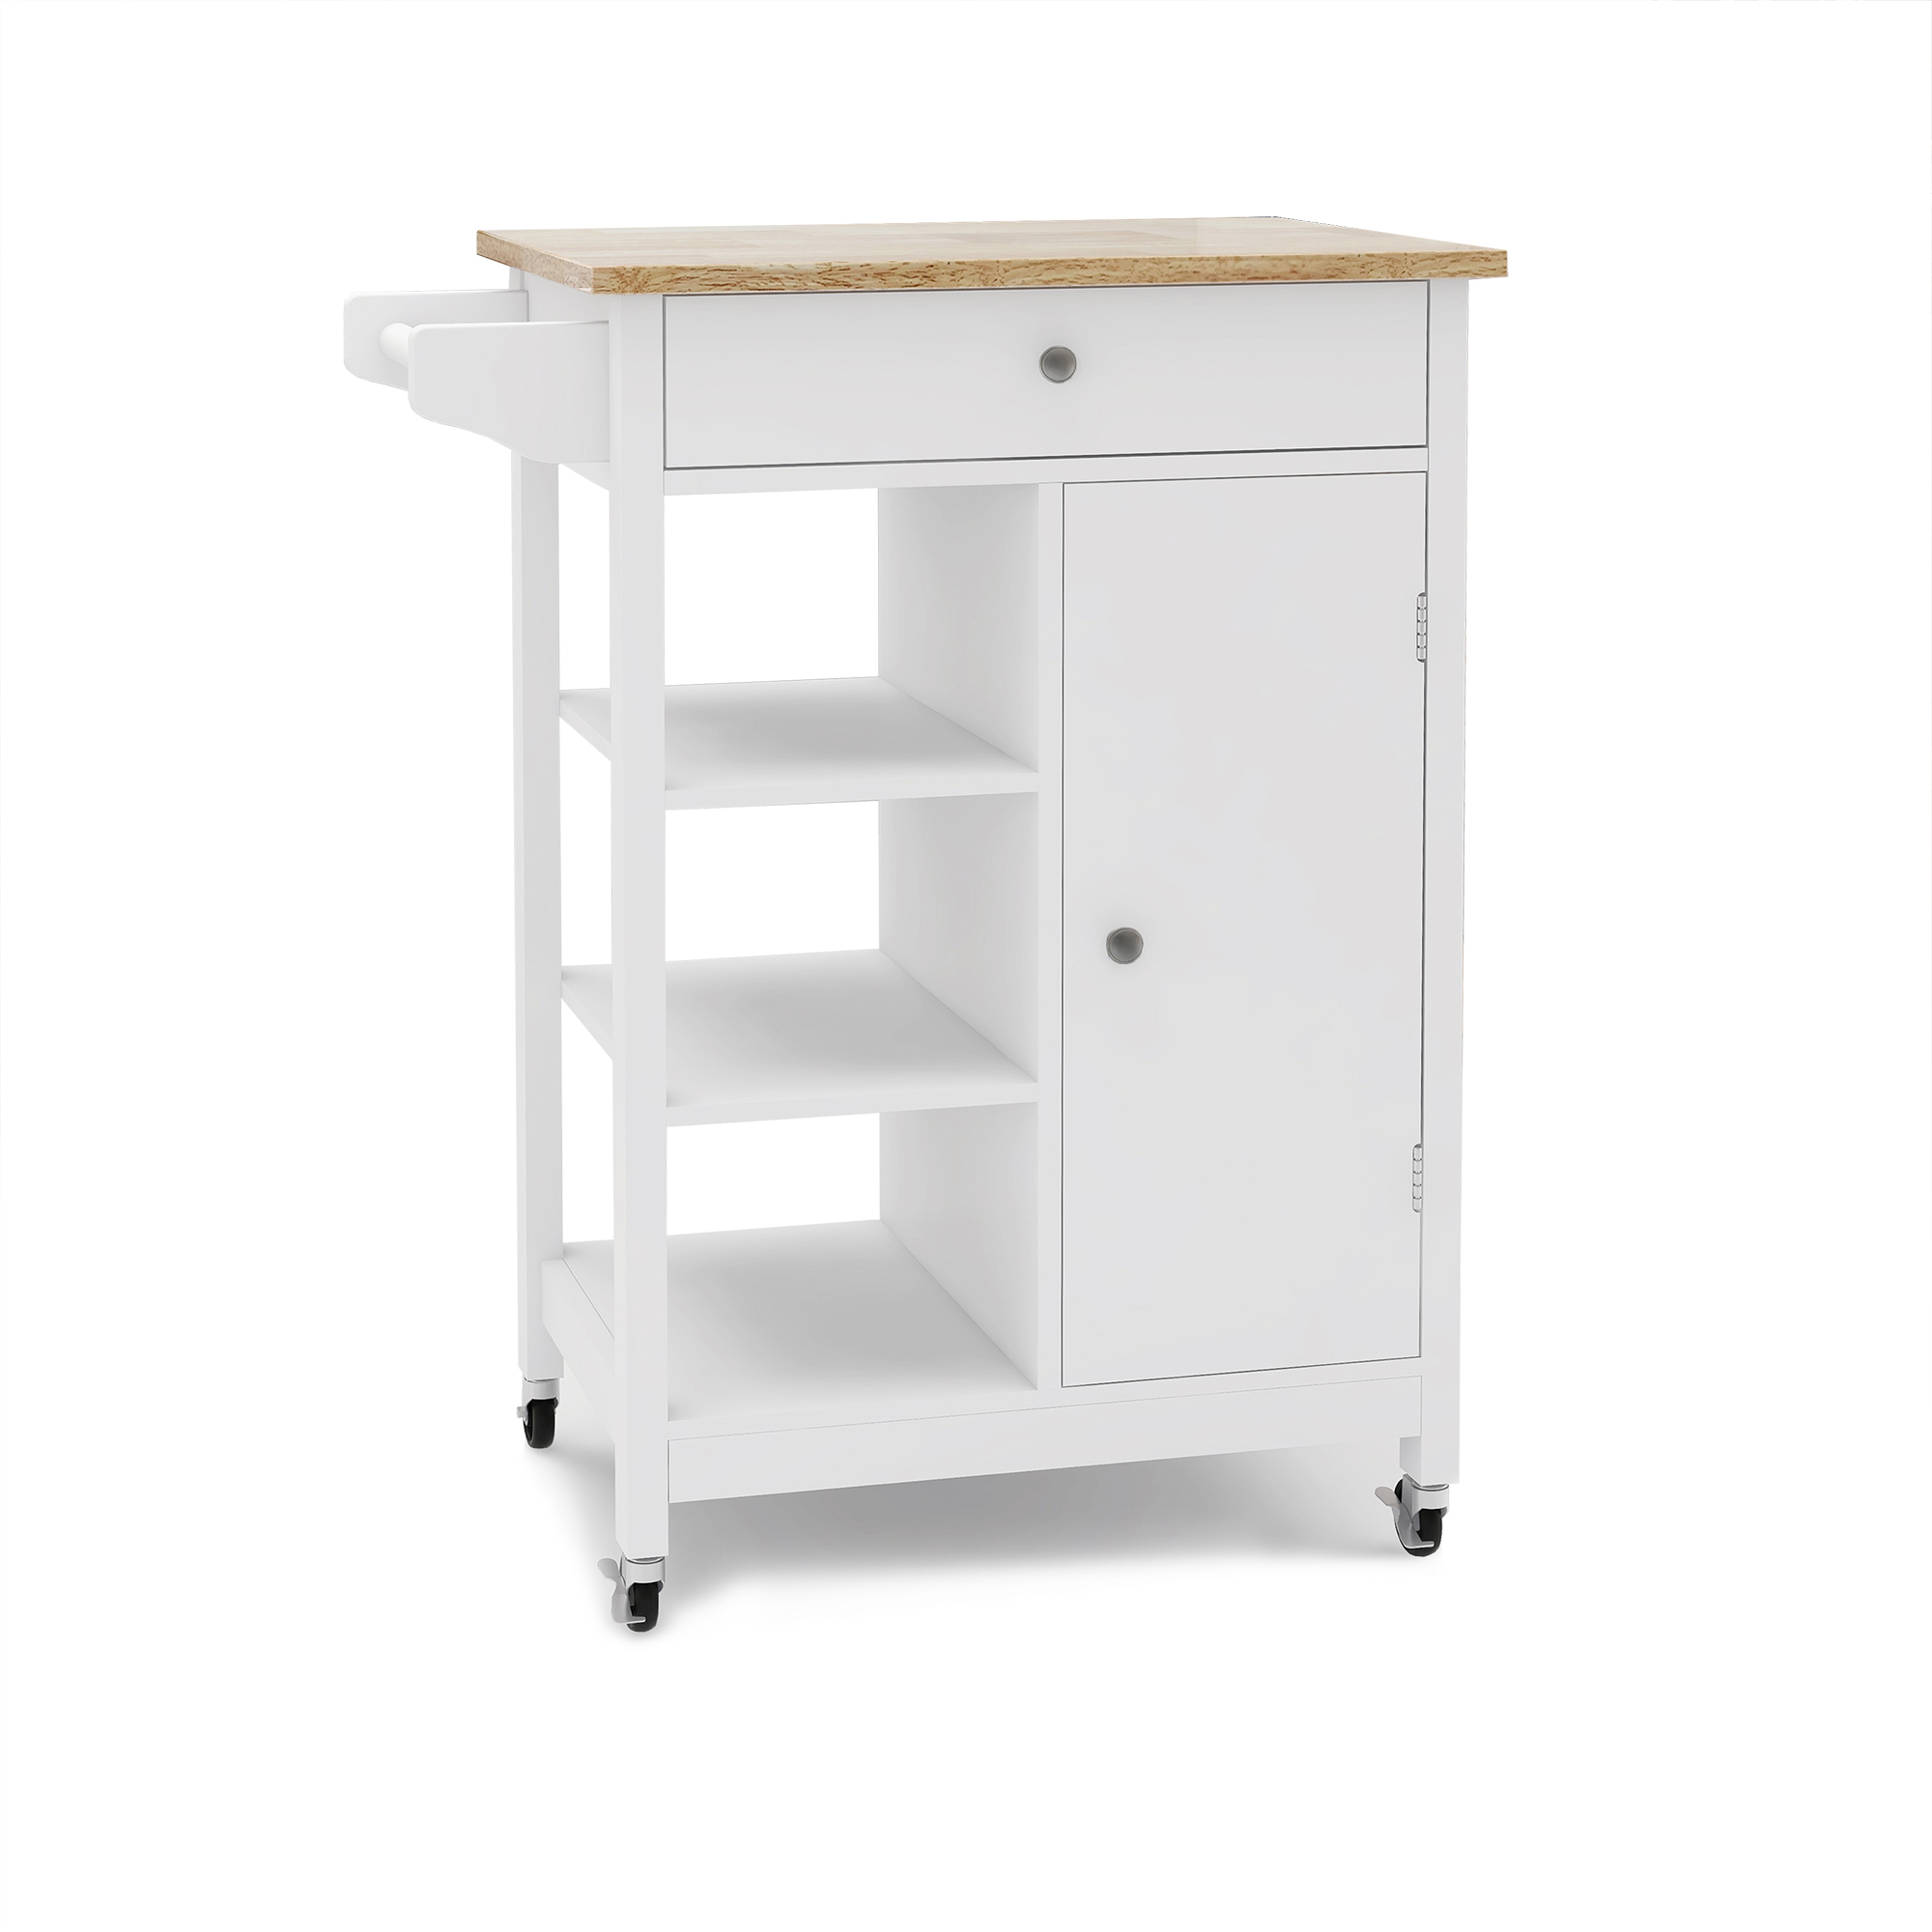 Kitchen island rolling trolley cart with towel rack rubber wood table top-CASAINC